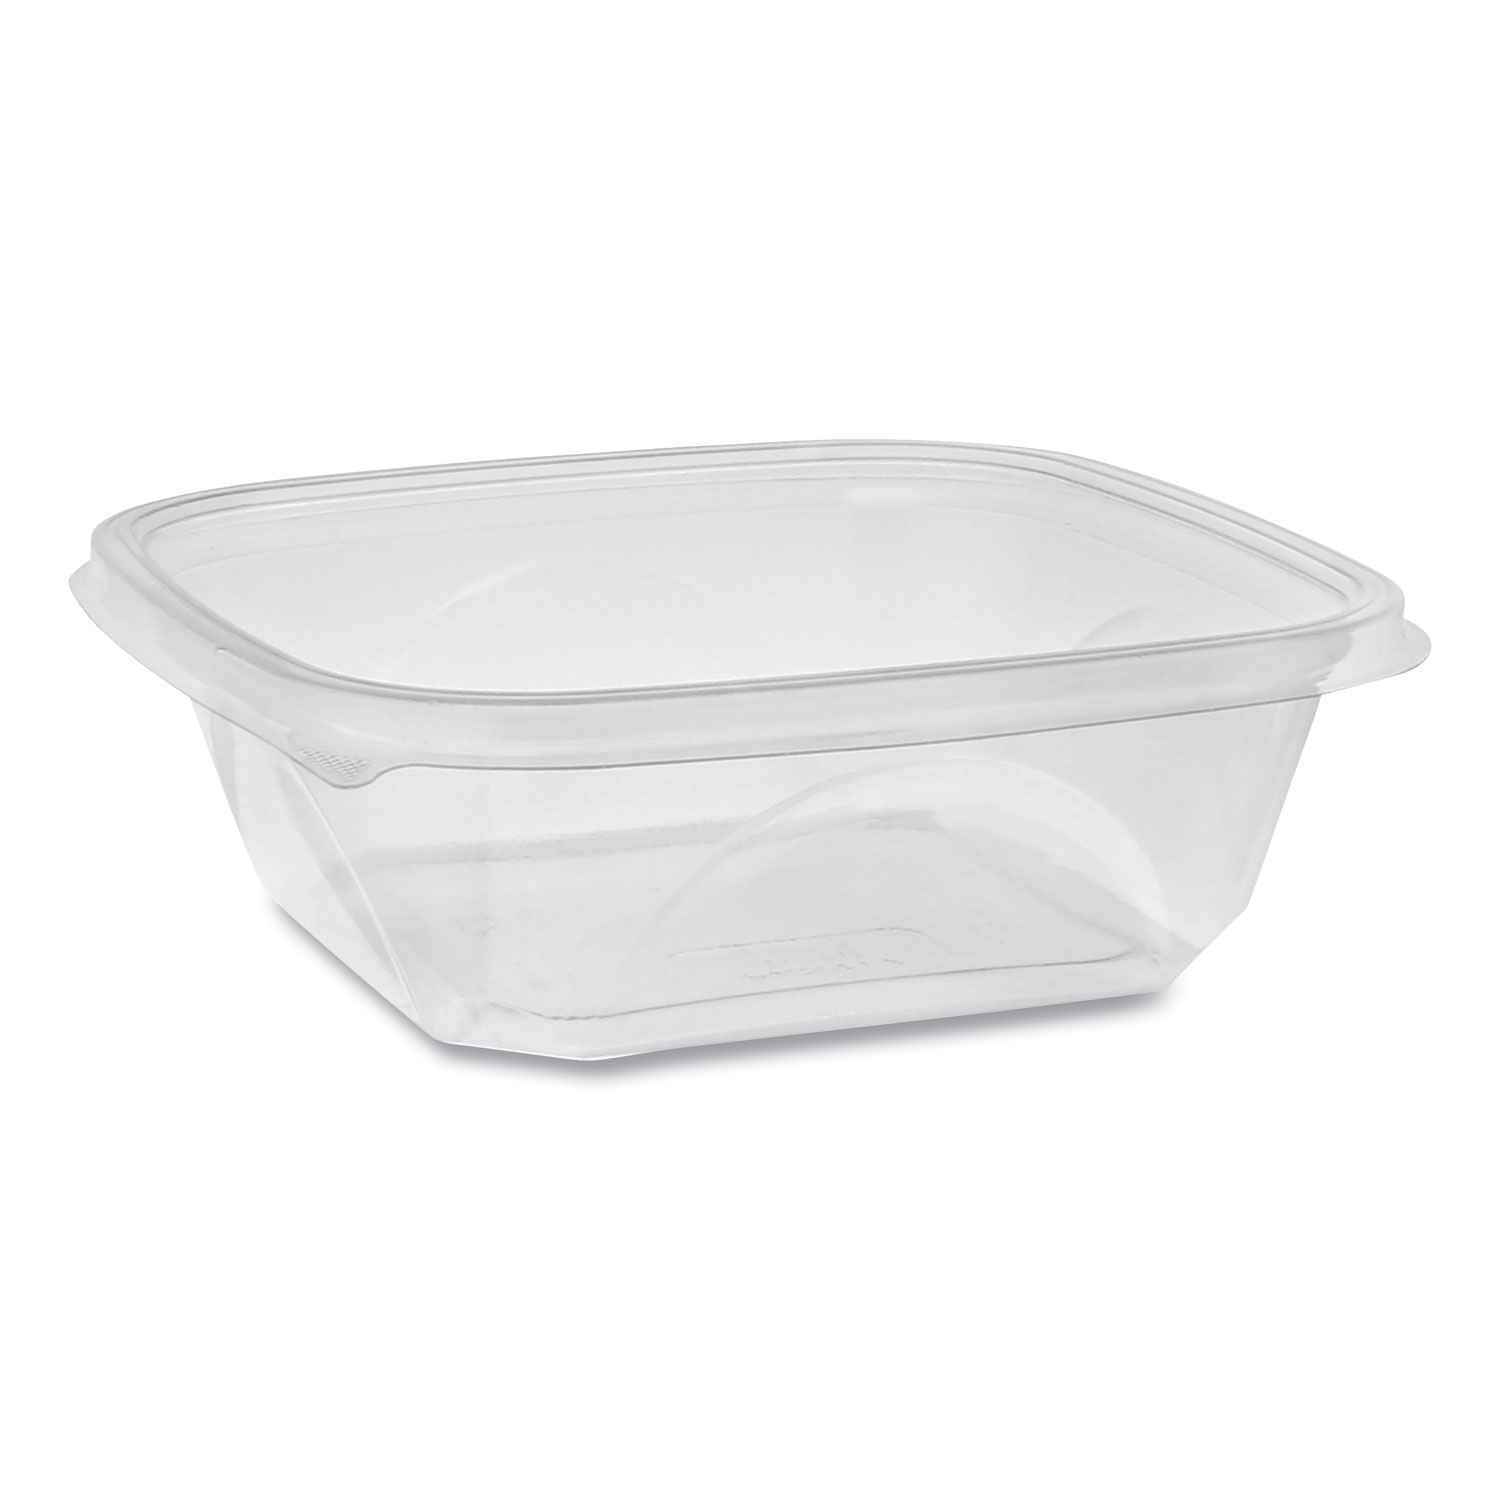 Pactiv EarthChoice Recycled PET Square Base Salad Containers, 7 x 7 x 2, 32 oz, Clear, 300/Carton